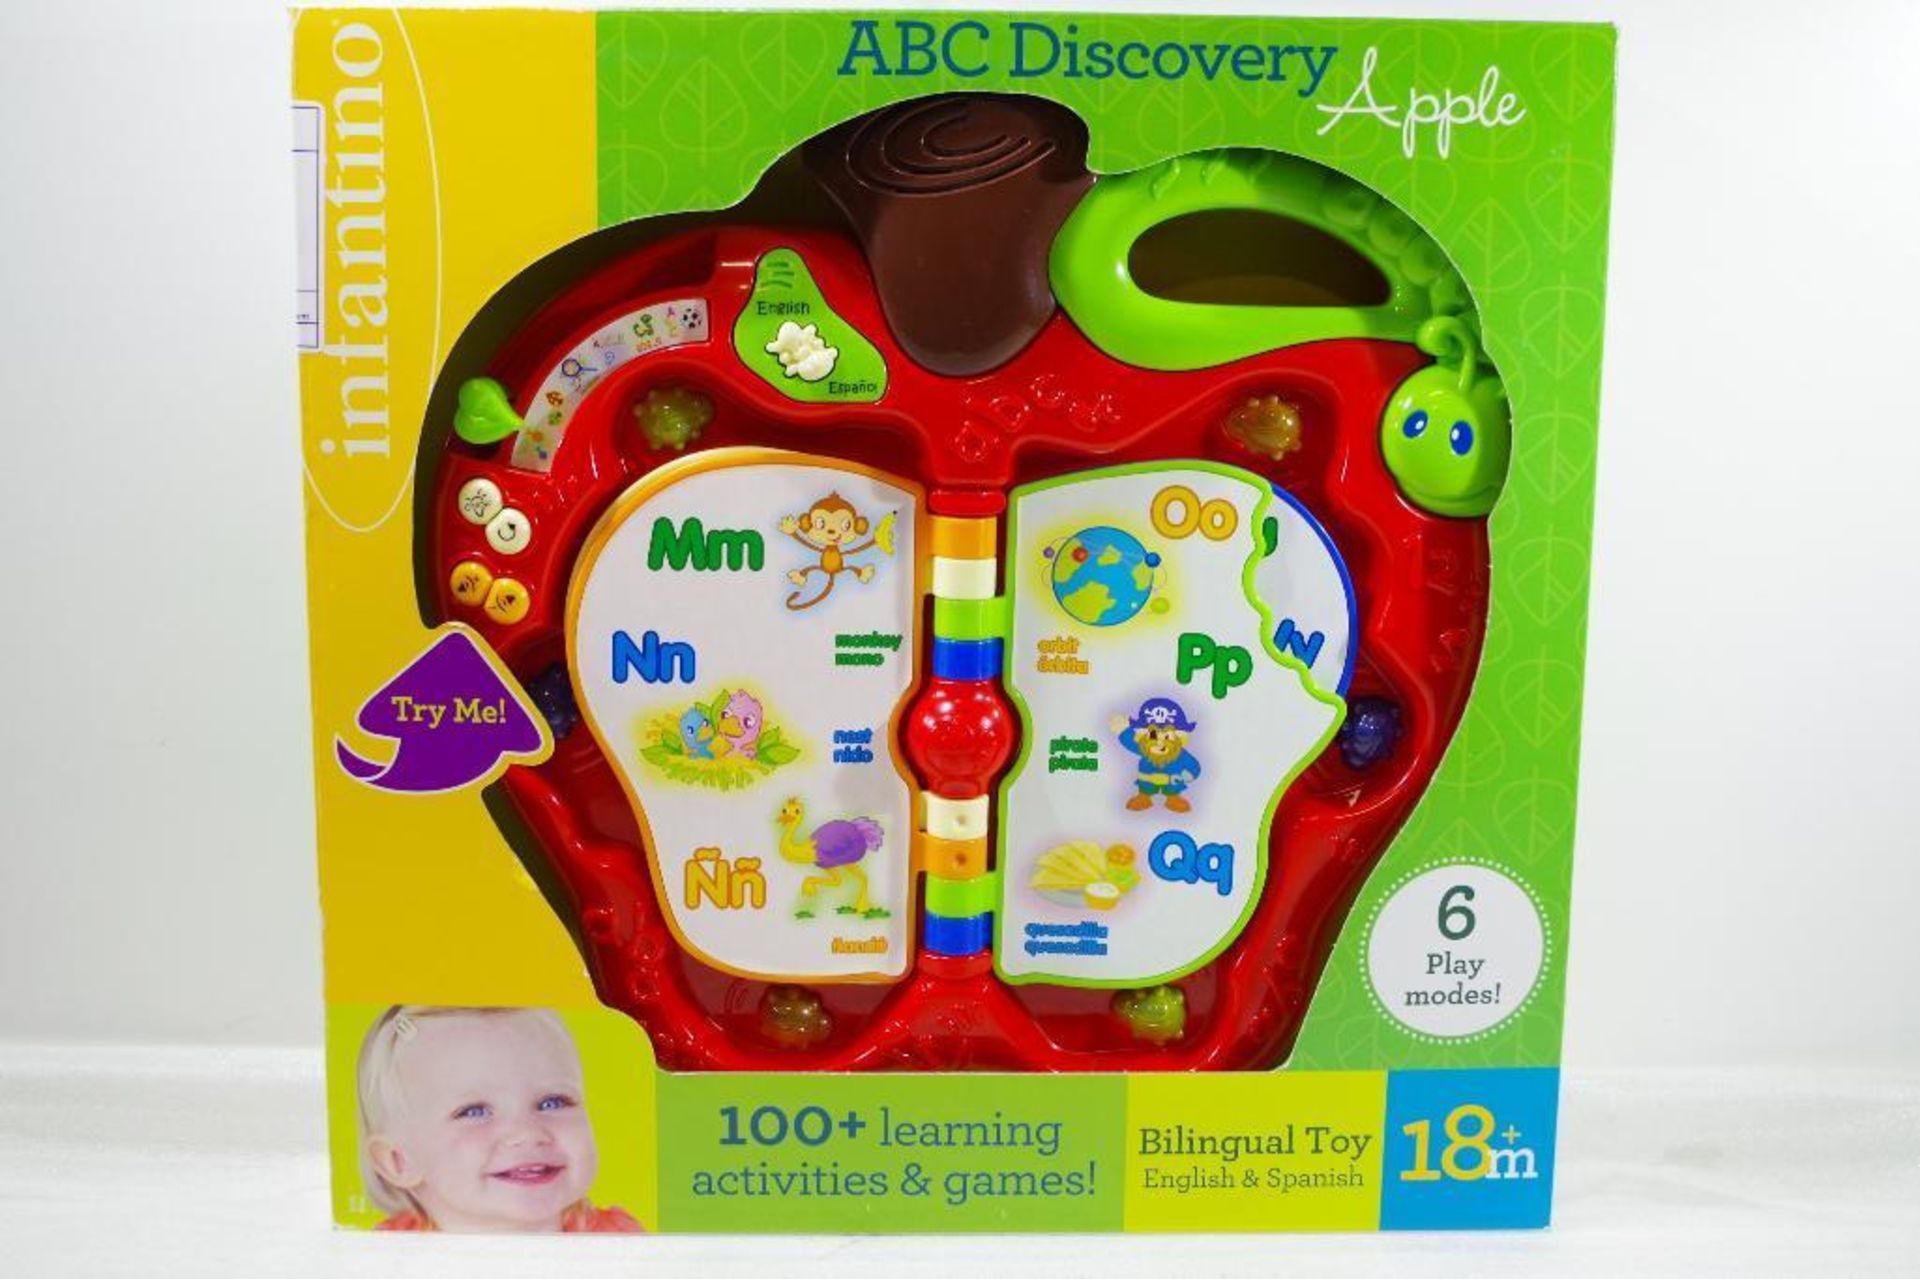 ABC Bilingual Discovery Apple - Image 2 of 2